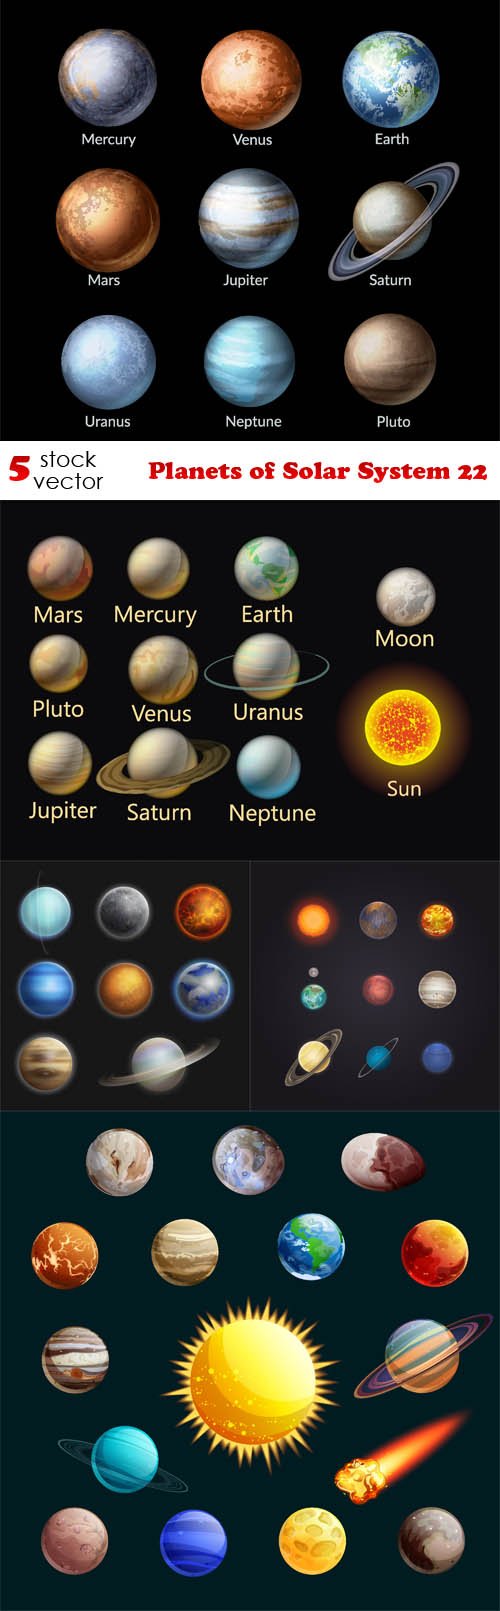 Vectors - Planets of Solar System 22